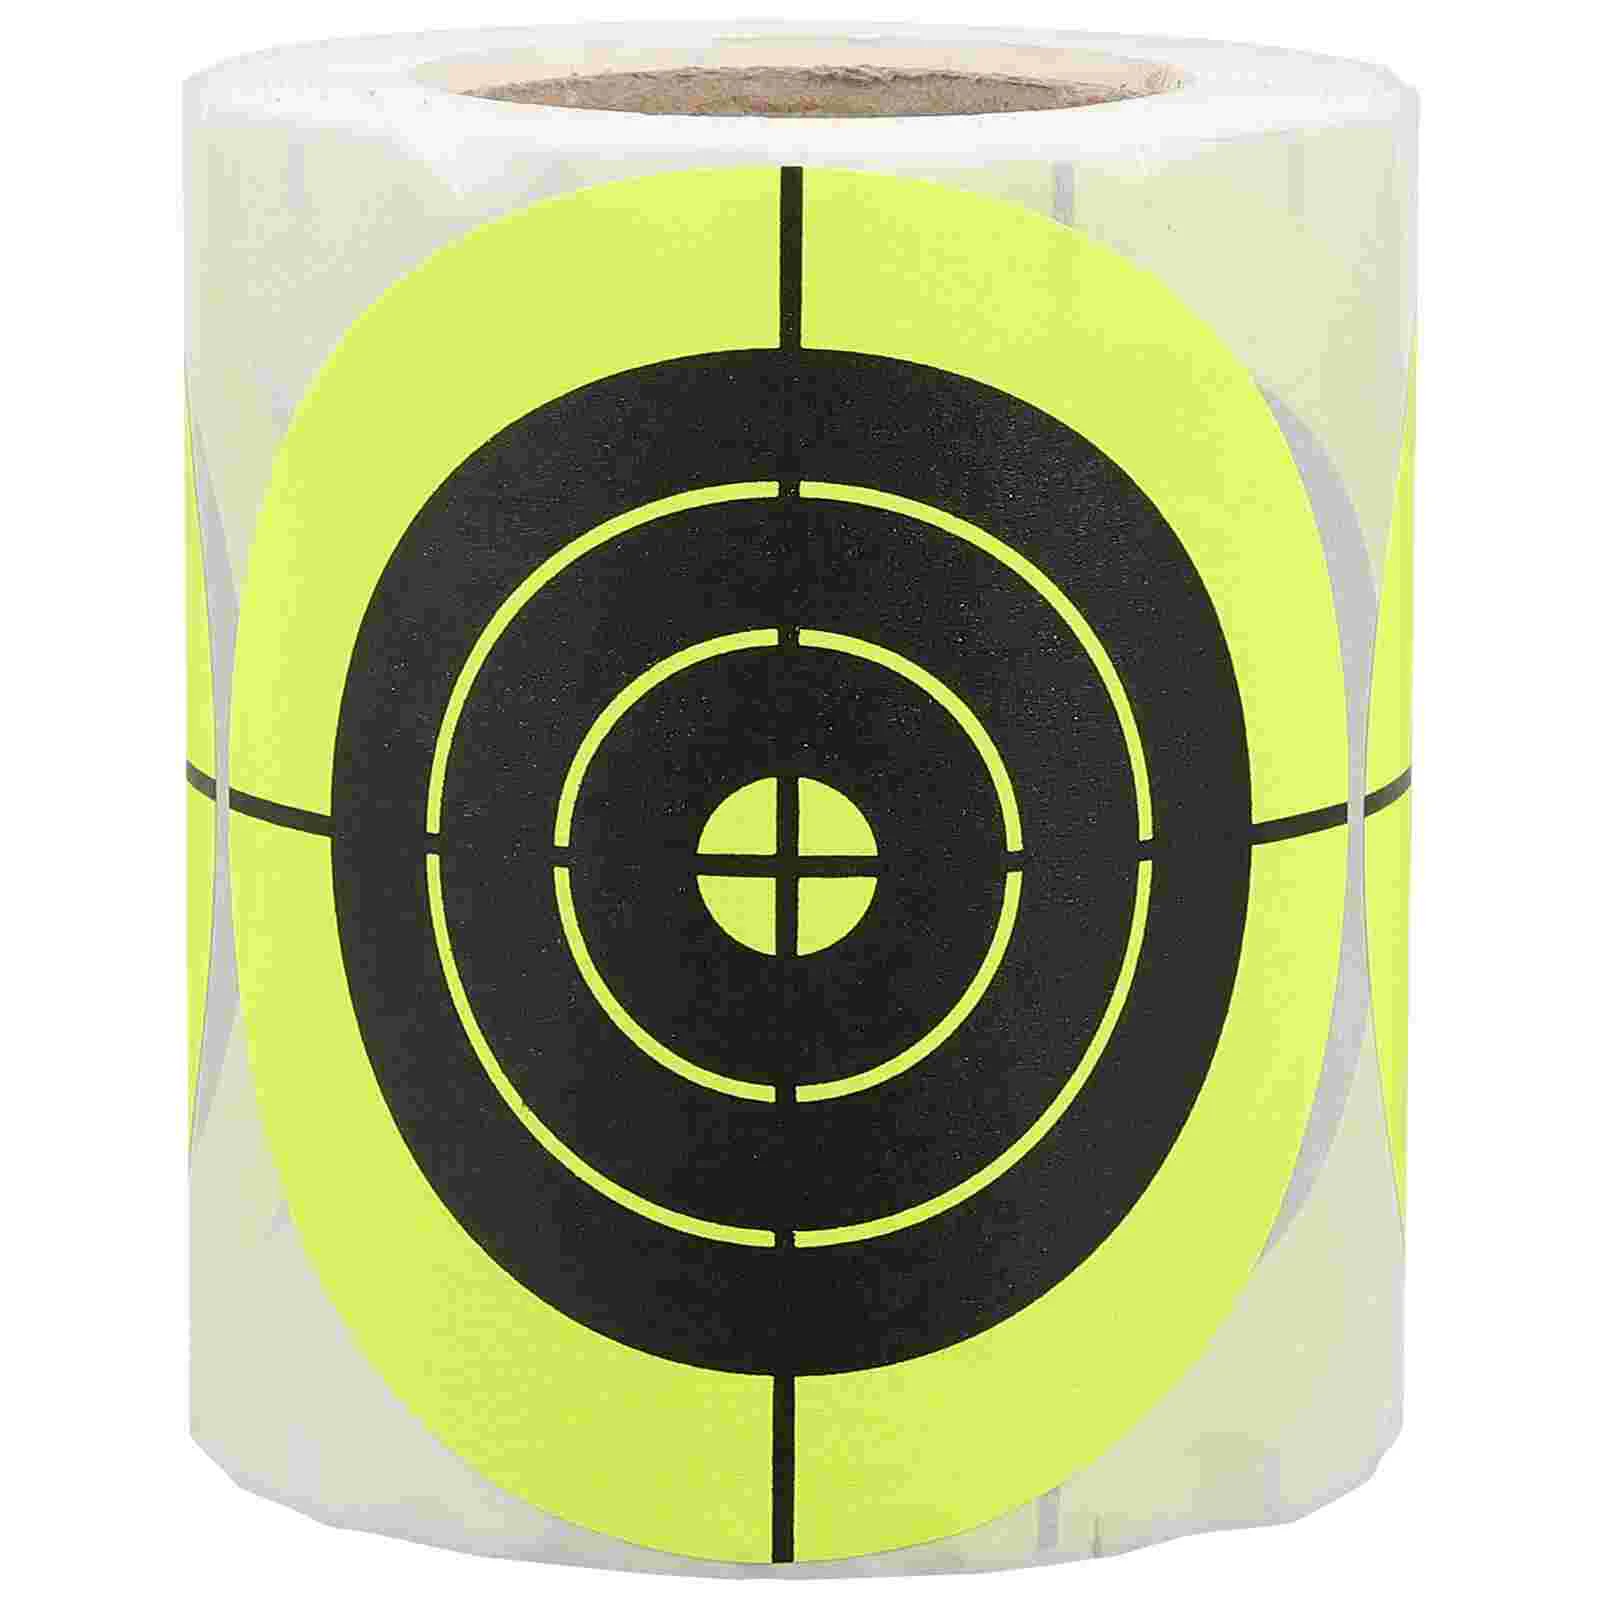 

Target Paper Creative Spot Fluorescent Shooting Circle Labels Hunting Accessories Tool Targets Self-adhesive Stickers Round